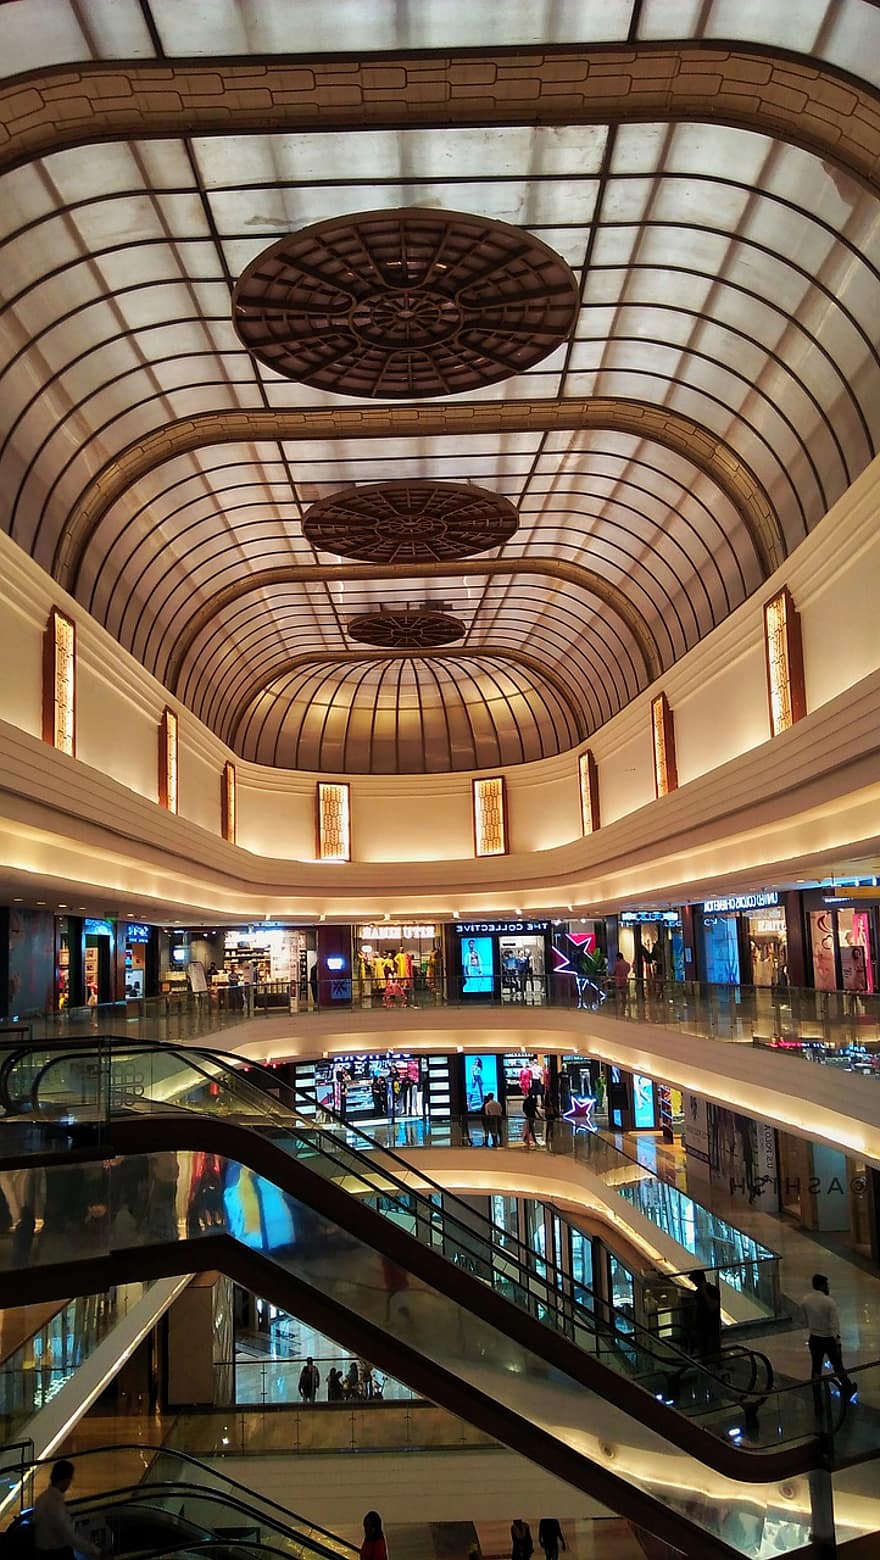 Mall, Escalator, Interior, Shopping Mall, Commercial Building, Stores, Building, Architecture, Urban, indoors, modern